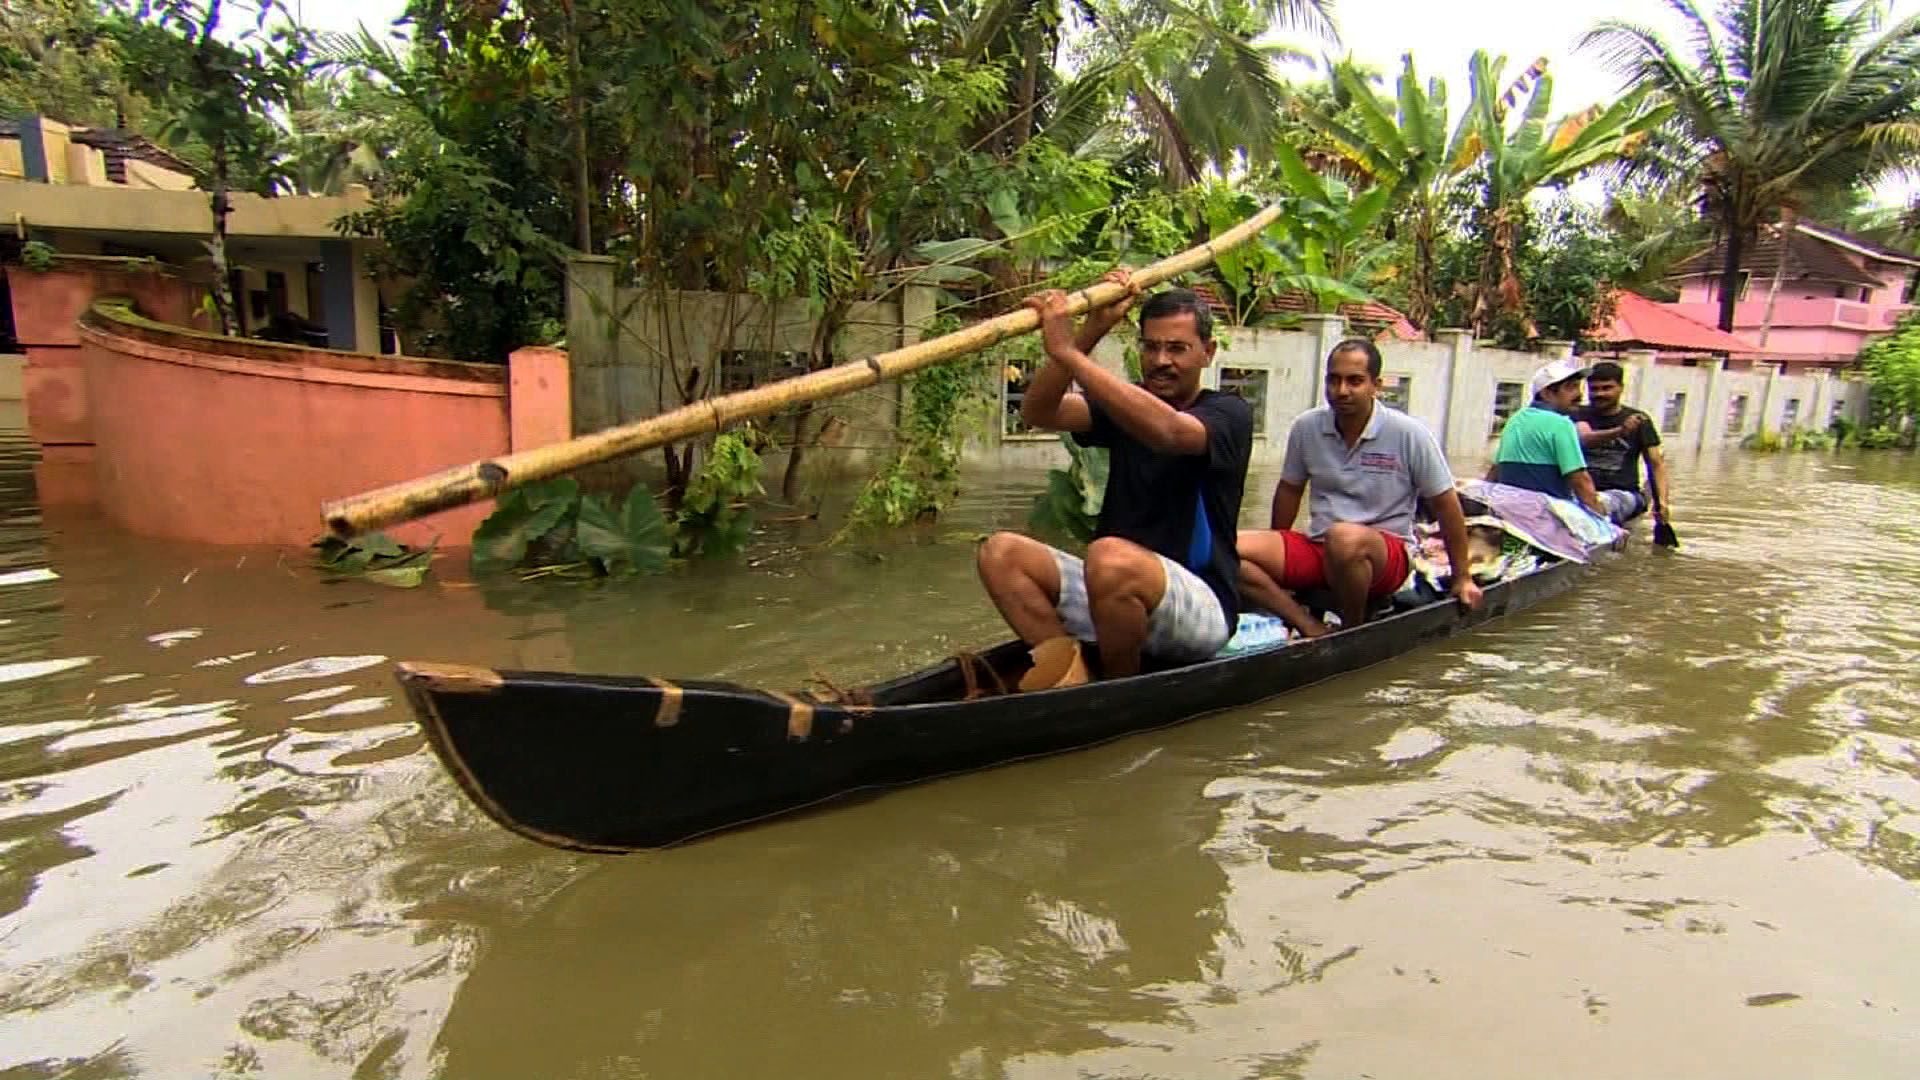 Kerala floods aftermath: Residents try to pick up the pieces | CNN